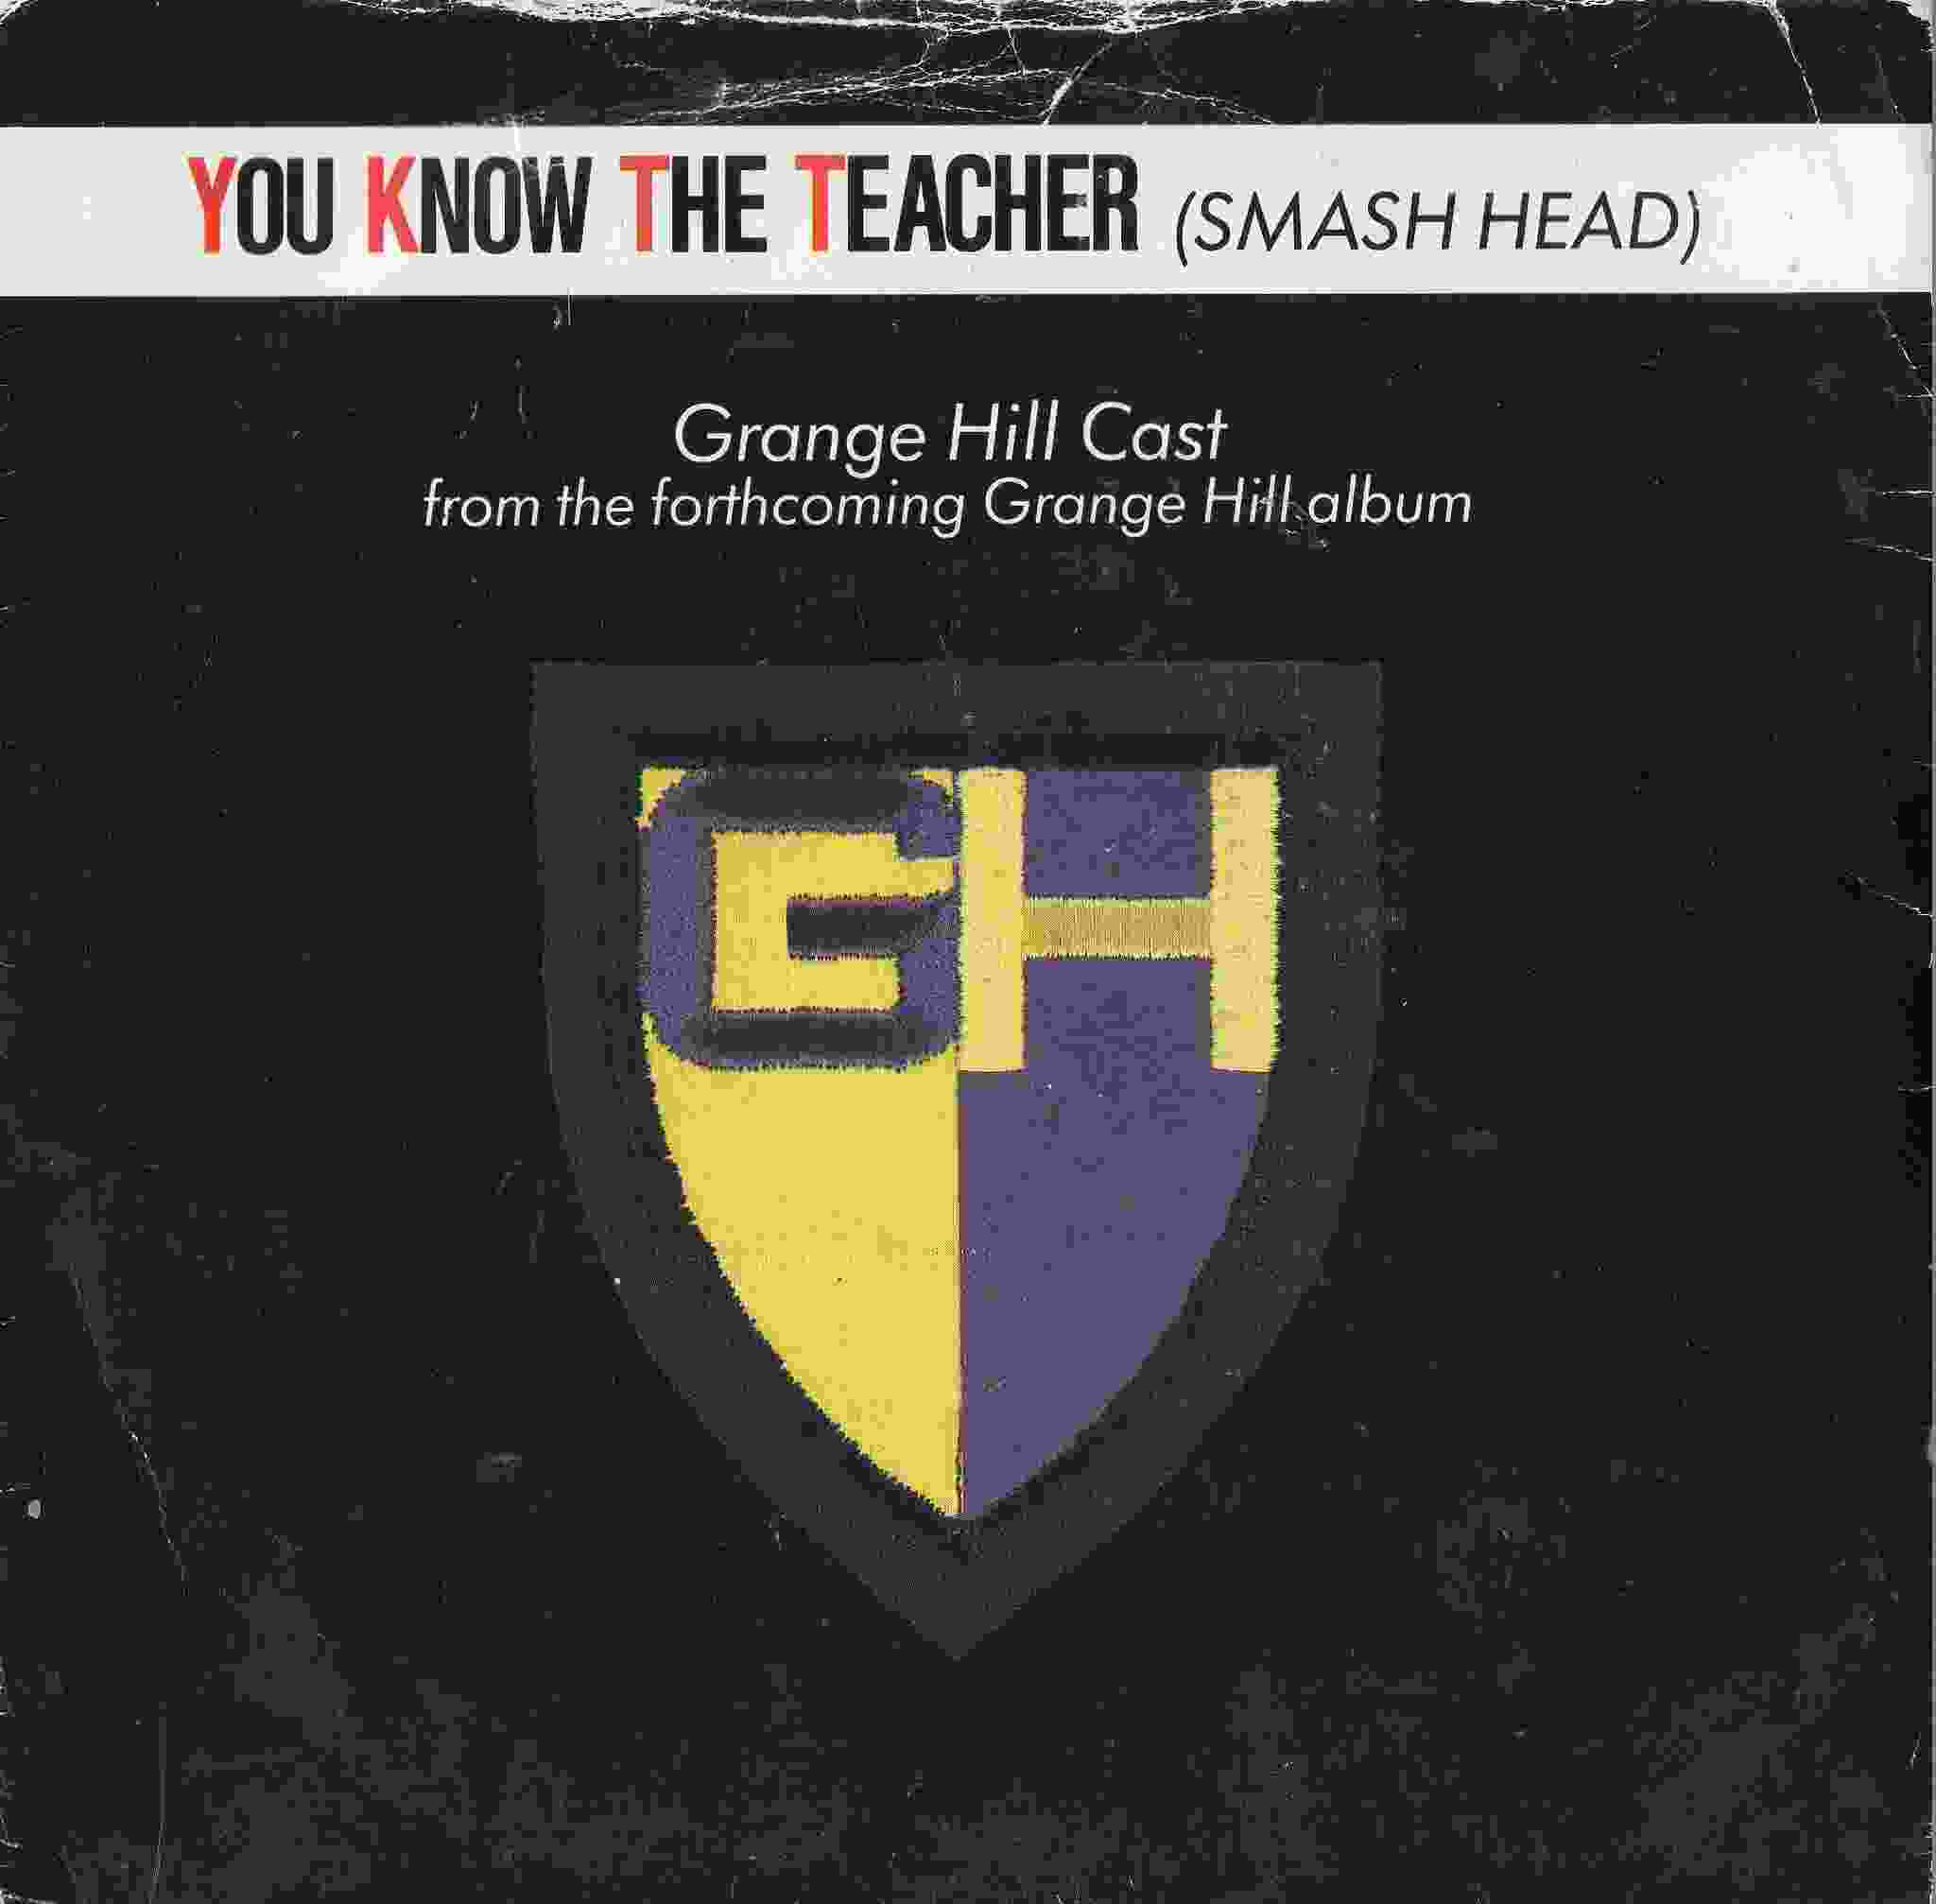 Picture of RESL 205 You know the teacher (Grange Hill) by artist Grange Hill Cast from the BBC records and Tapes library